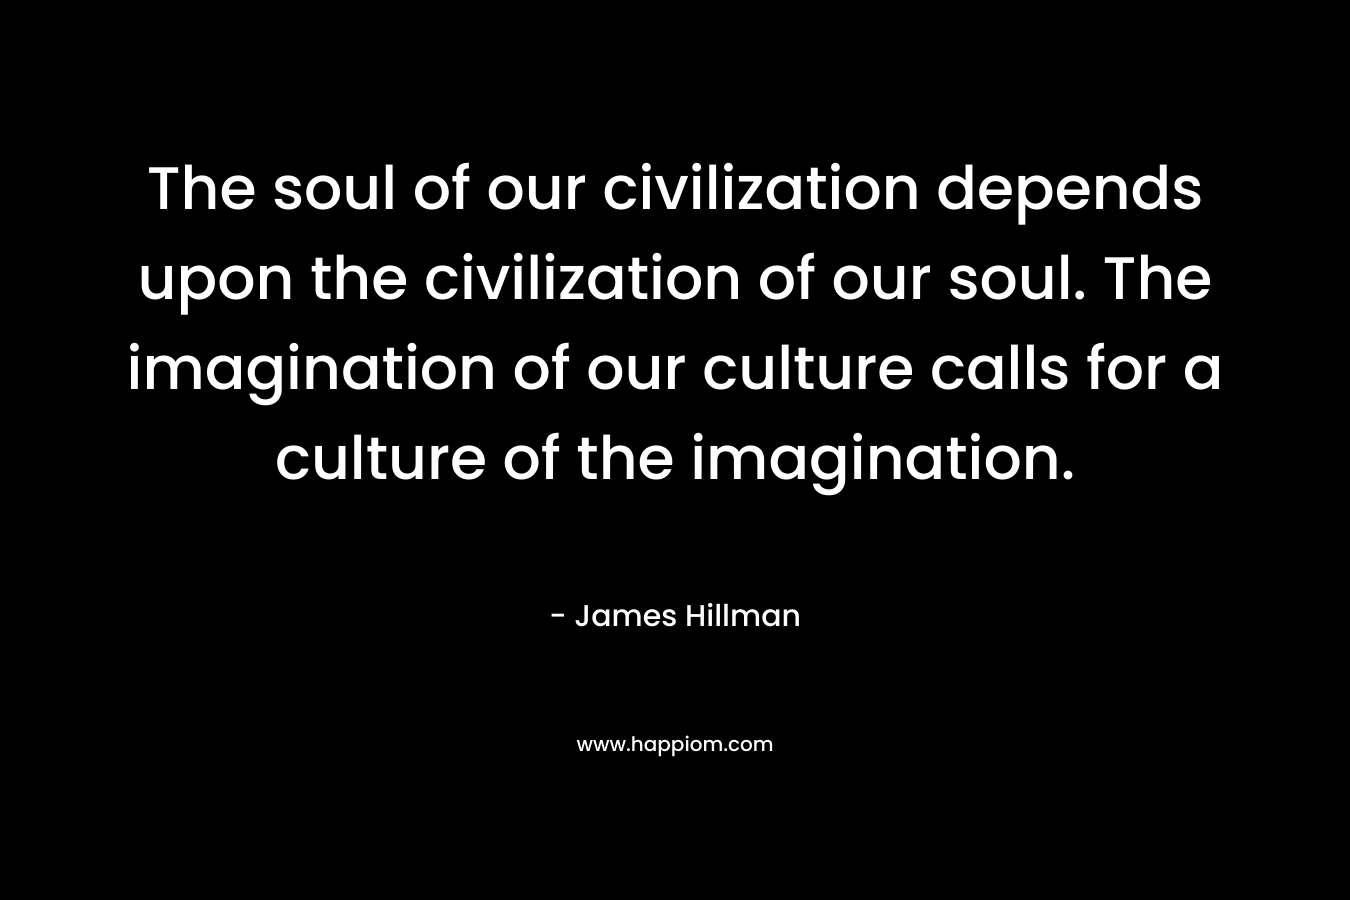 The soul of our civilization depends upon the civilization of our soul. The imagination of our culture calls for a culture of the imagination.